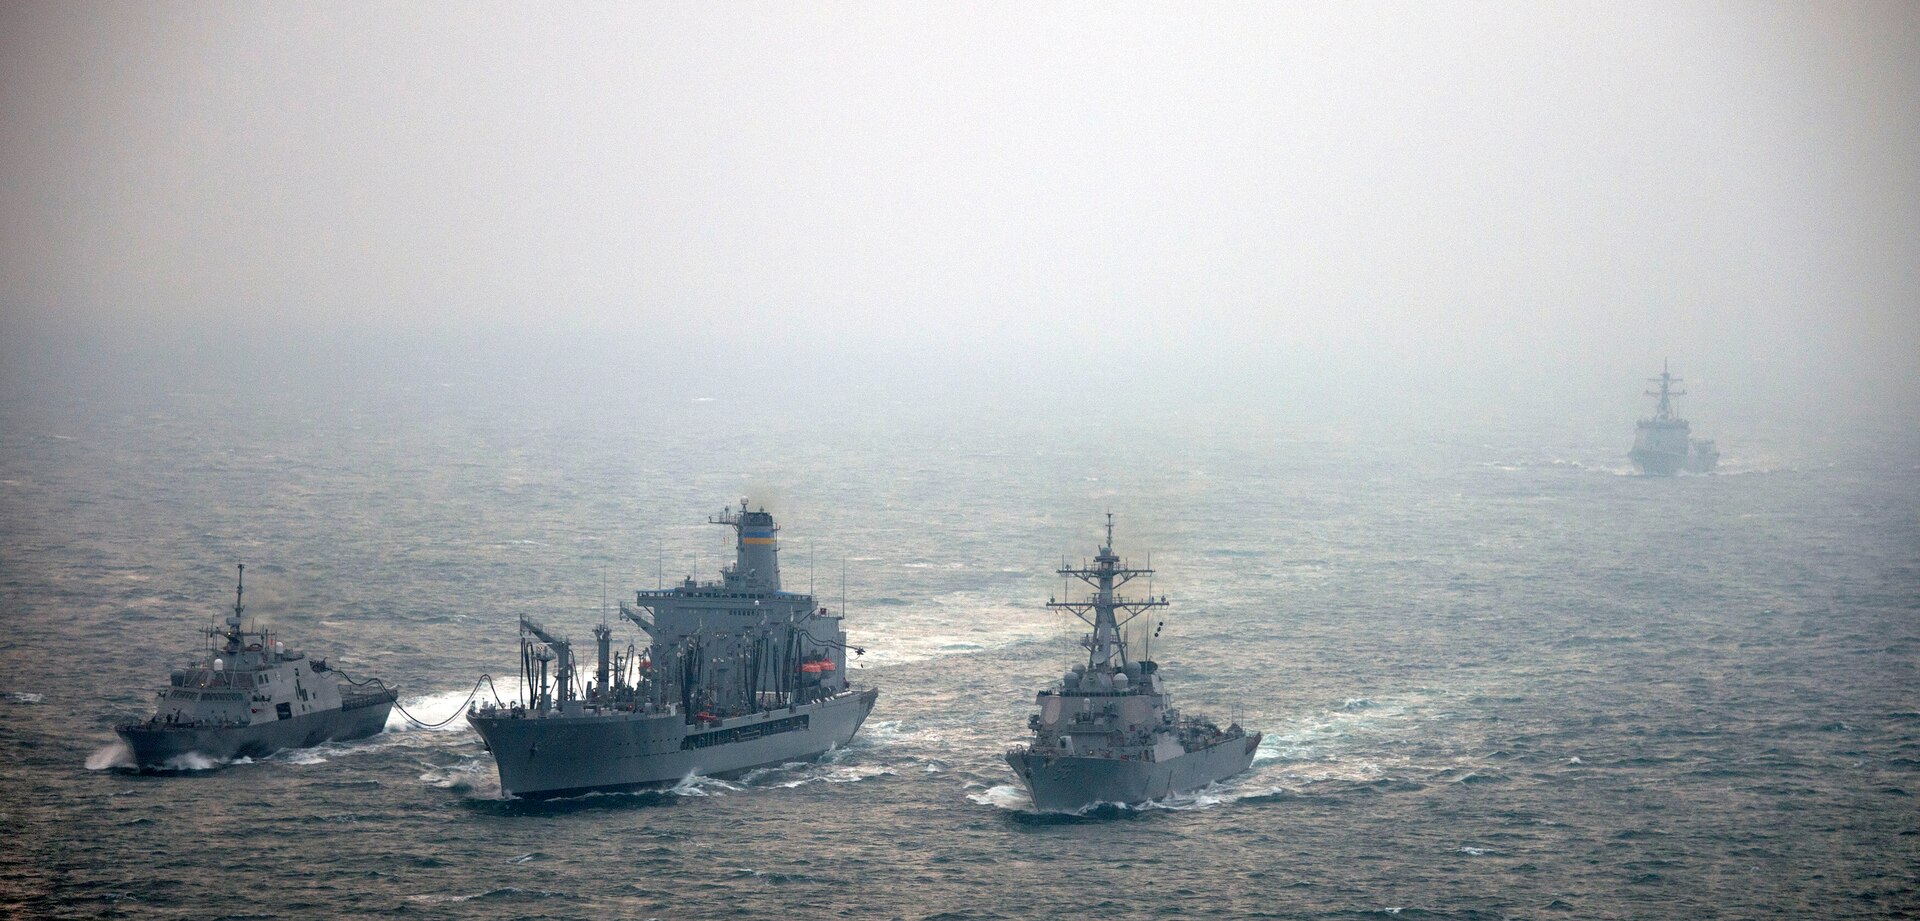 WATERS TO THE WEST OF THE KOREAN PENINSULA (March 9, 2015) The littoral combat ship USS Fort Worth (LCS 3) and the guided-missile destroyer USS John S. McCain (DDG 56) conduct a replenishment-at-sea from the Military Sealift Command fleet replenishment oiler USNS Pecos (T-AO 197) during exercise Foal Eagle 2015. Foal Eagle is a series of annual training events that are defense-oriented and designed to increase readiness and maintain stability on the Korean Peninsula while strengthening the Republic of Korea-U.S. alliance and promoting regional peace and stability of the Indo-Asia-Pacific region. (U.S. Navy photo by Mass Communication Specialist 2nd Class Daniel M. Young/Released)